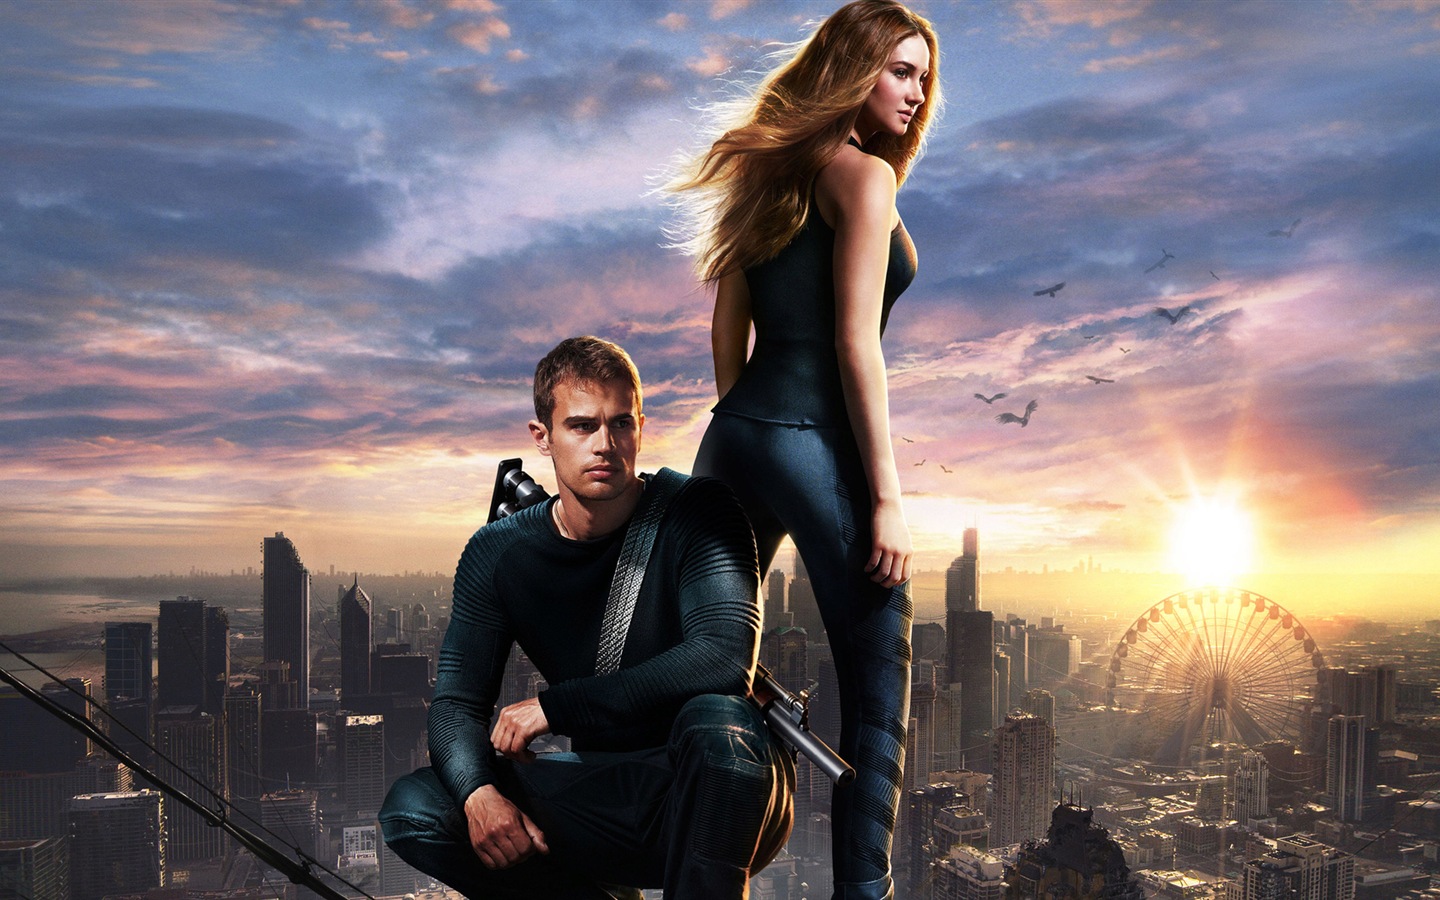 Divergent movie HD wallpapers #1 - 1440x900